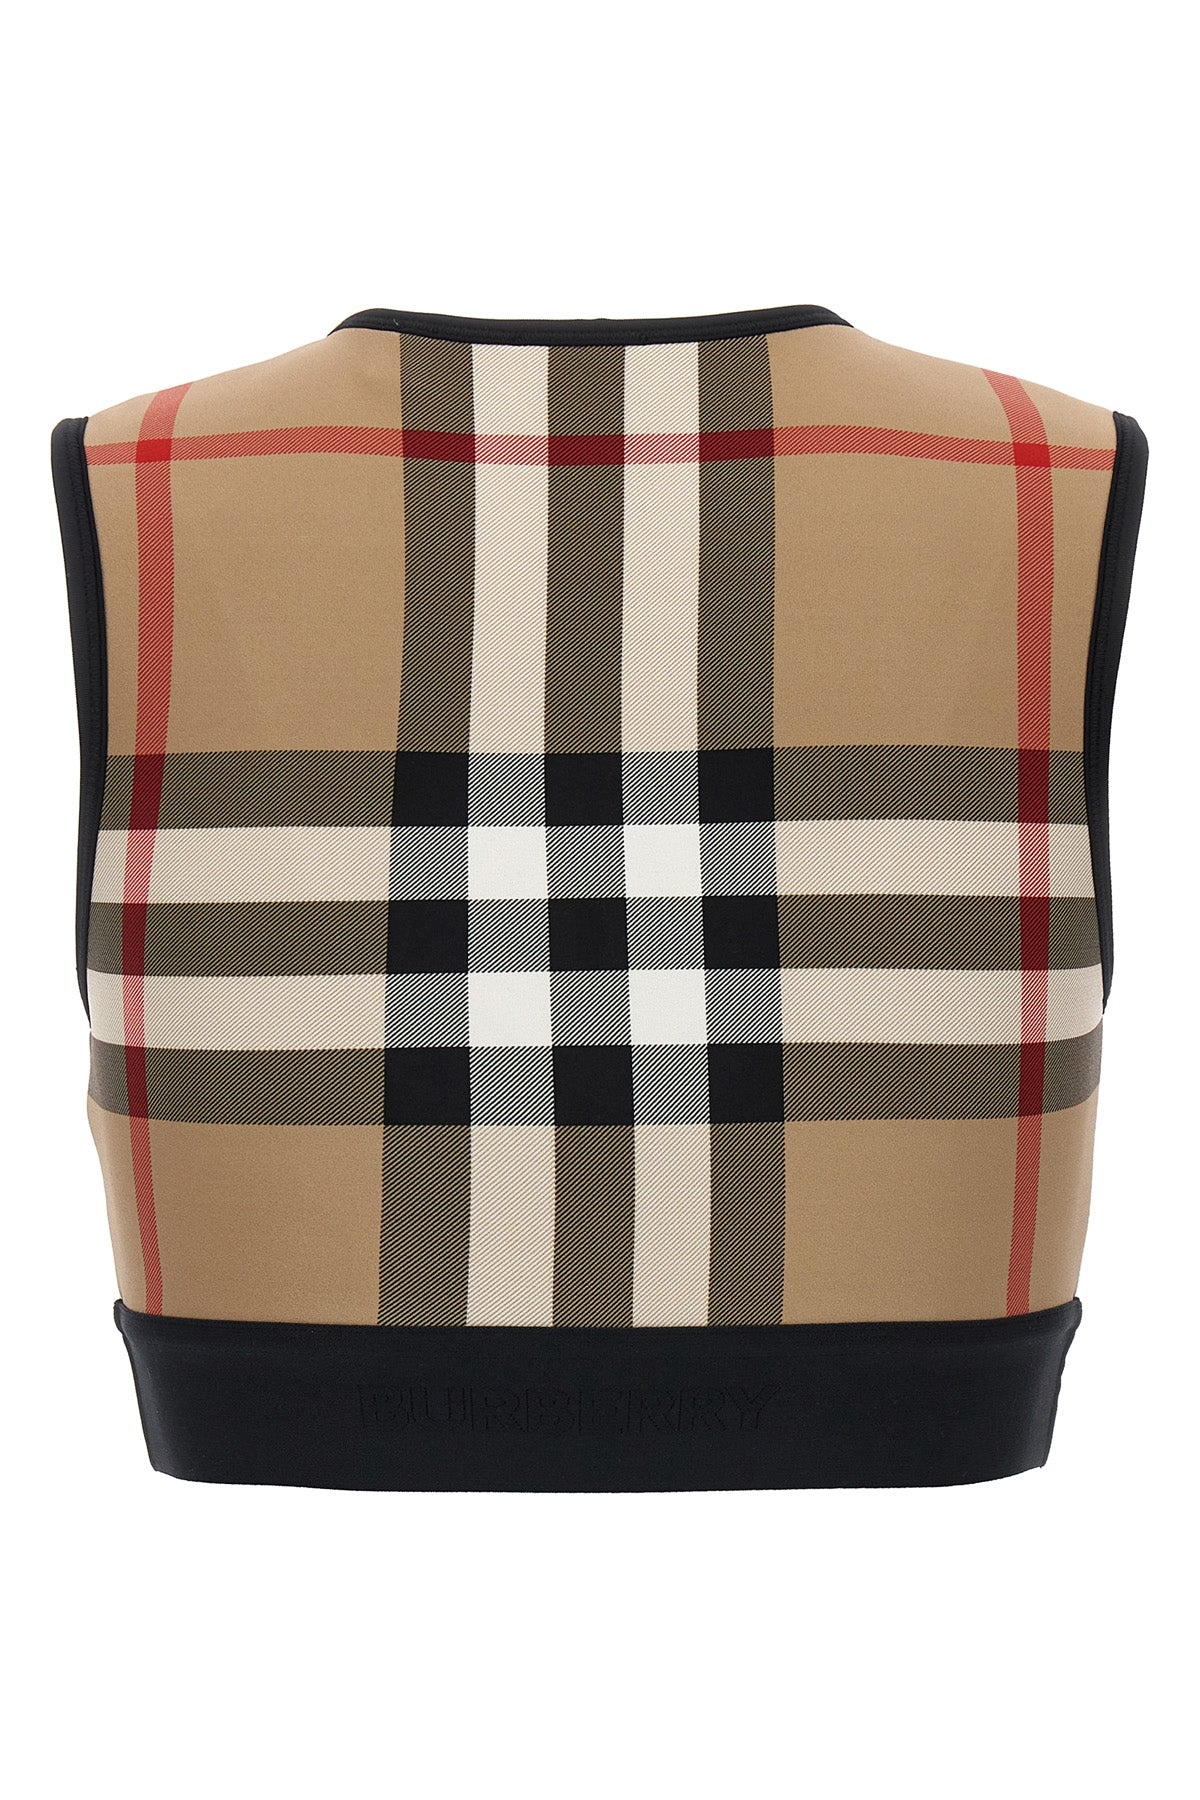 BURBERRY CHECK SPORTY TOP